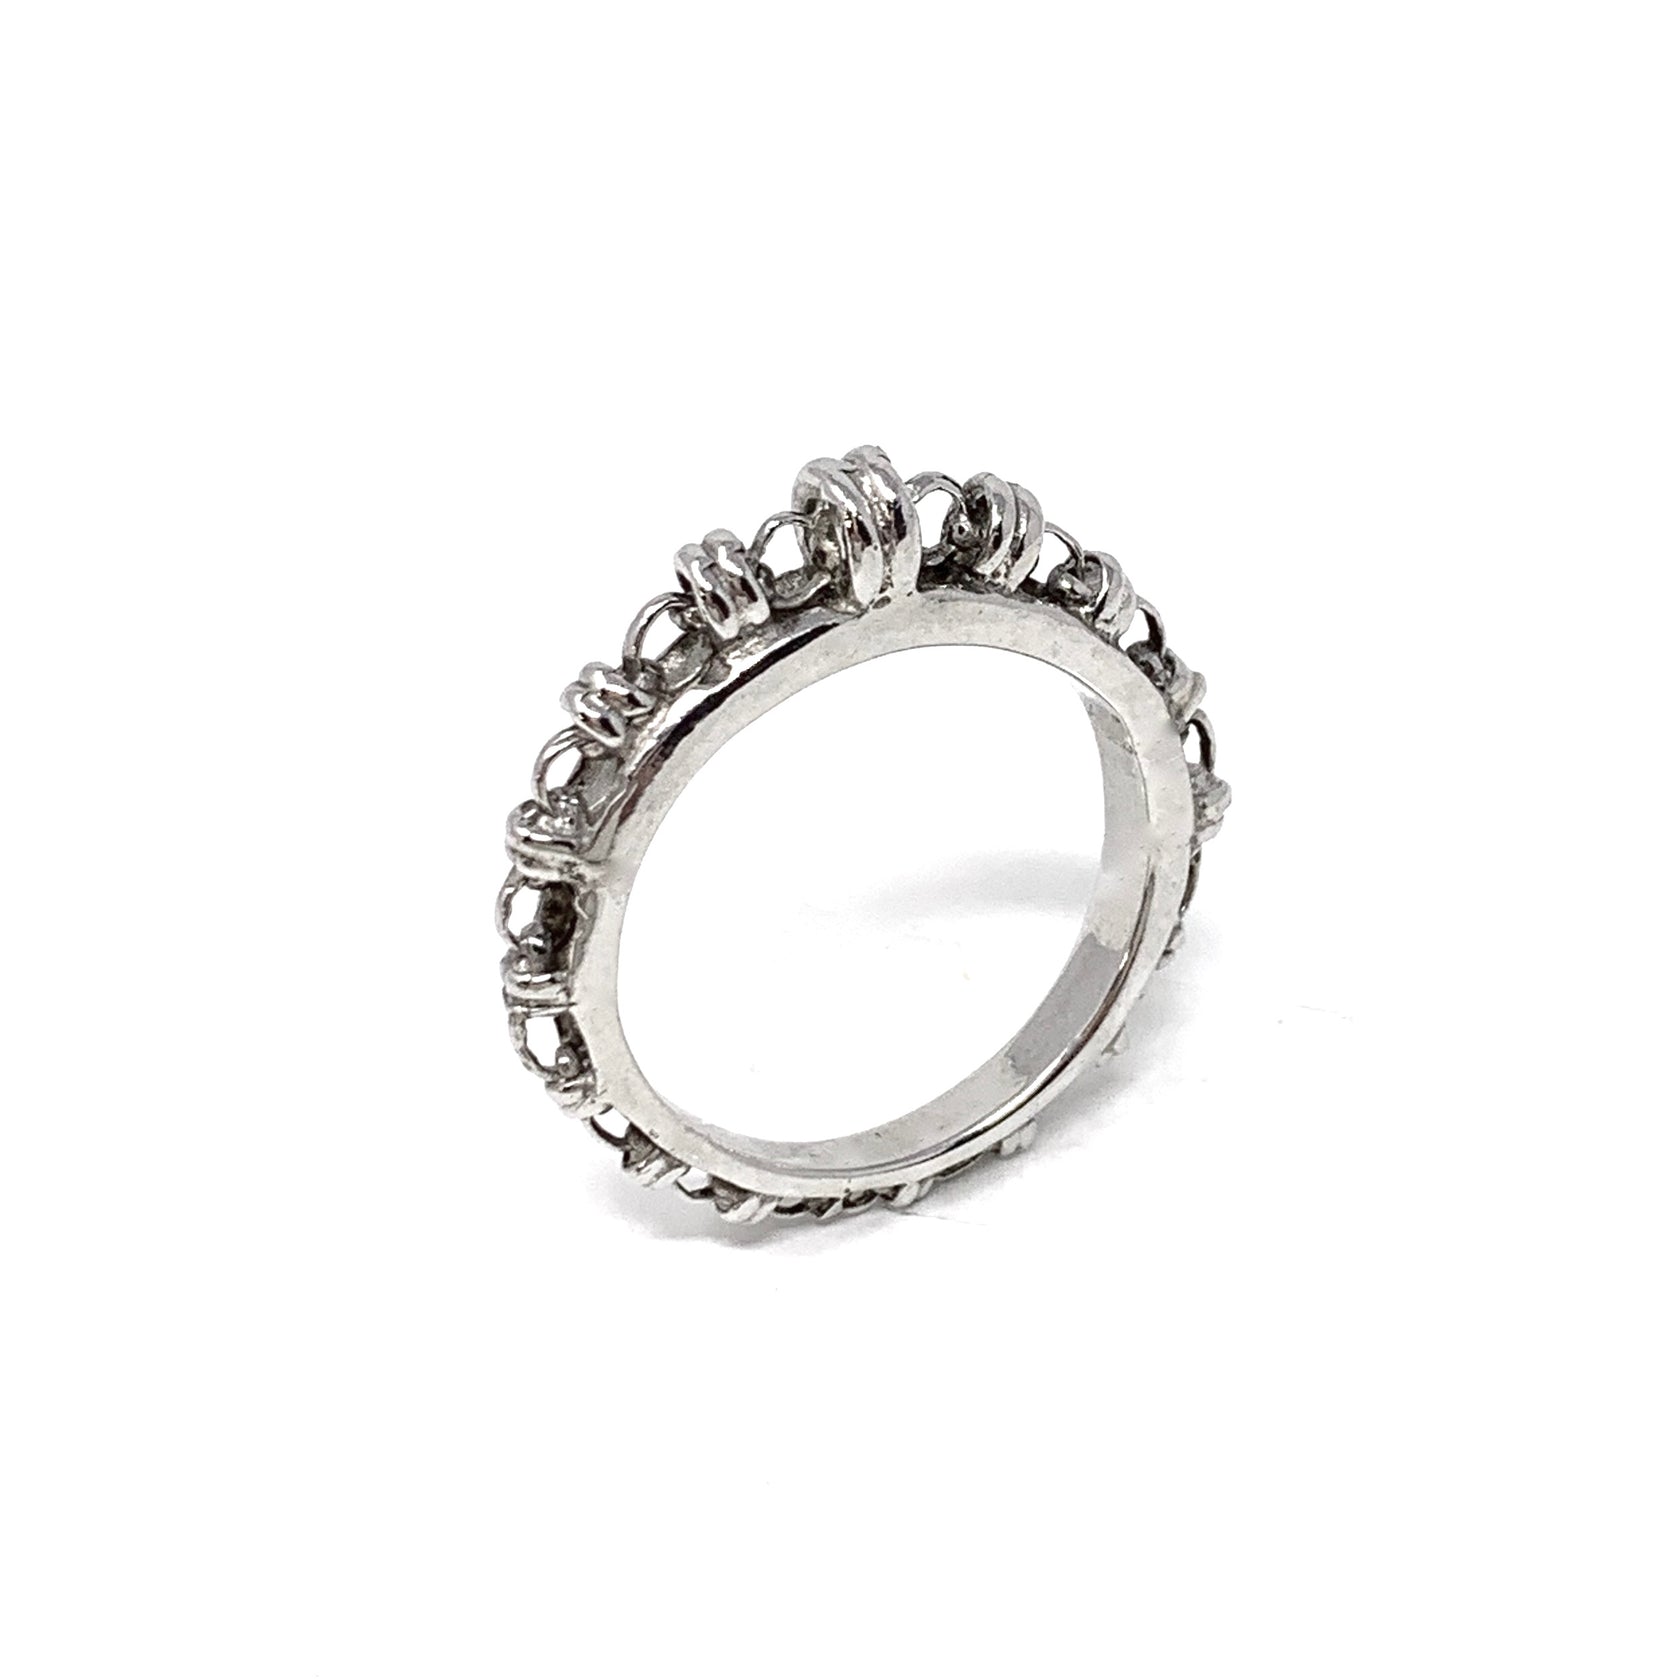 A silver ring with a silver chain design that has varying sizes of links to resemble a climb to the top - thus its Italian name ‘Scalare’: to climb. Designed and hand-crafted by DelBrenna Italian Jewelry designers and artisans in Tuscany.  